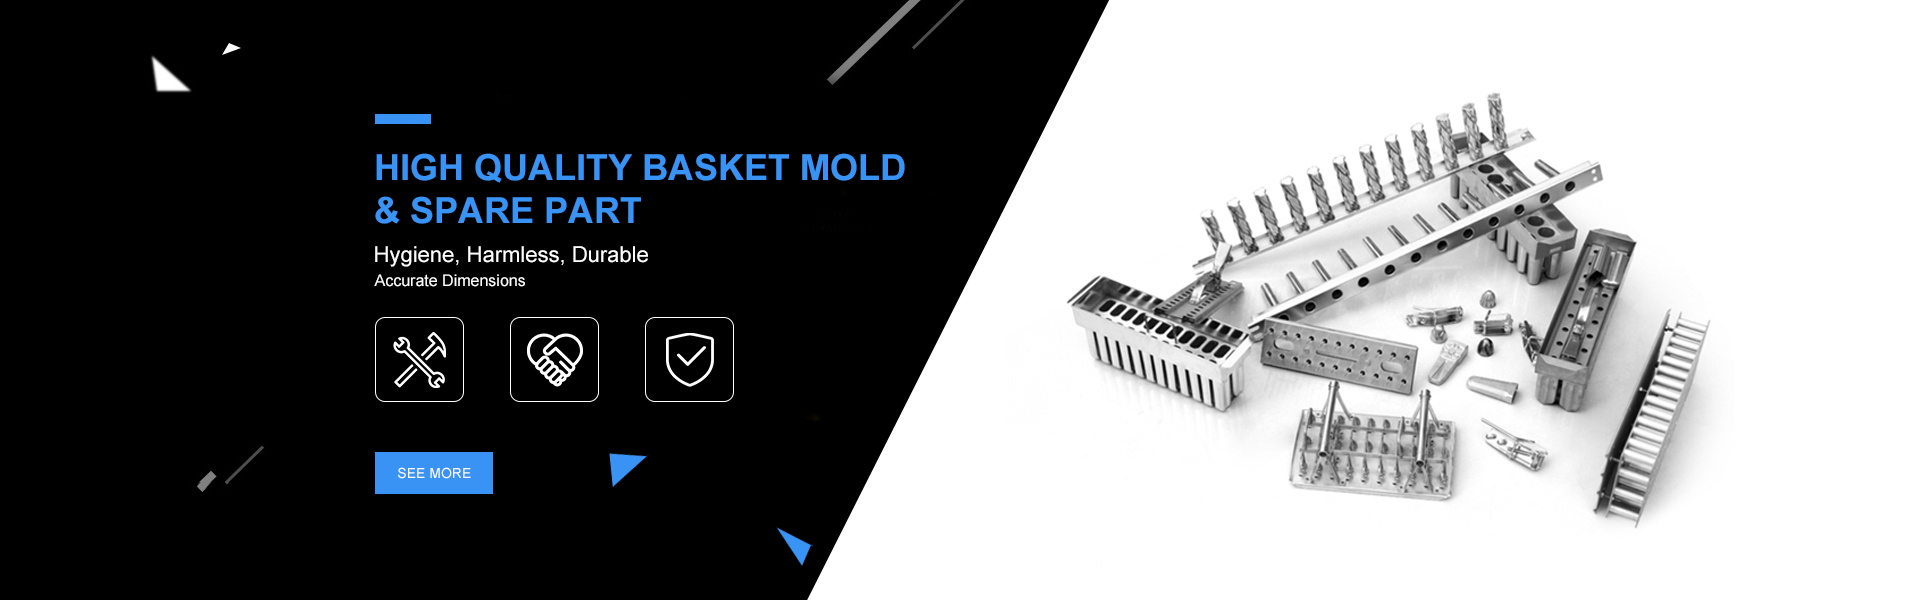 High Quality Basket Mold & Spare Part